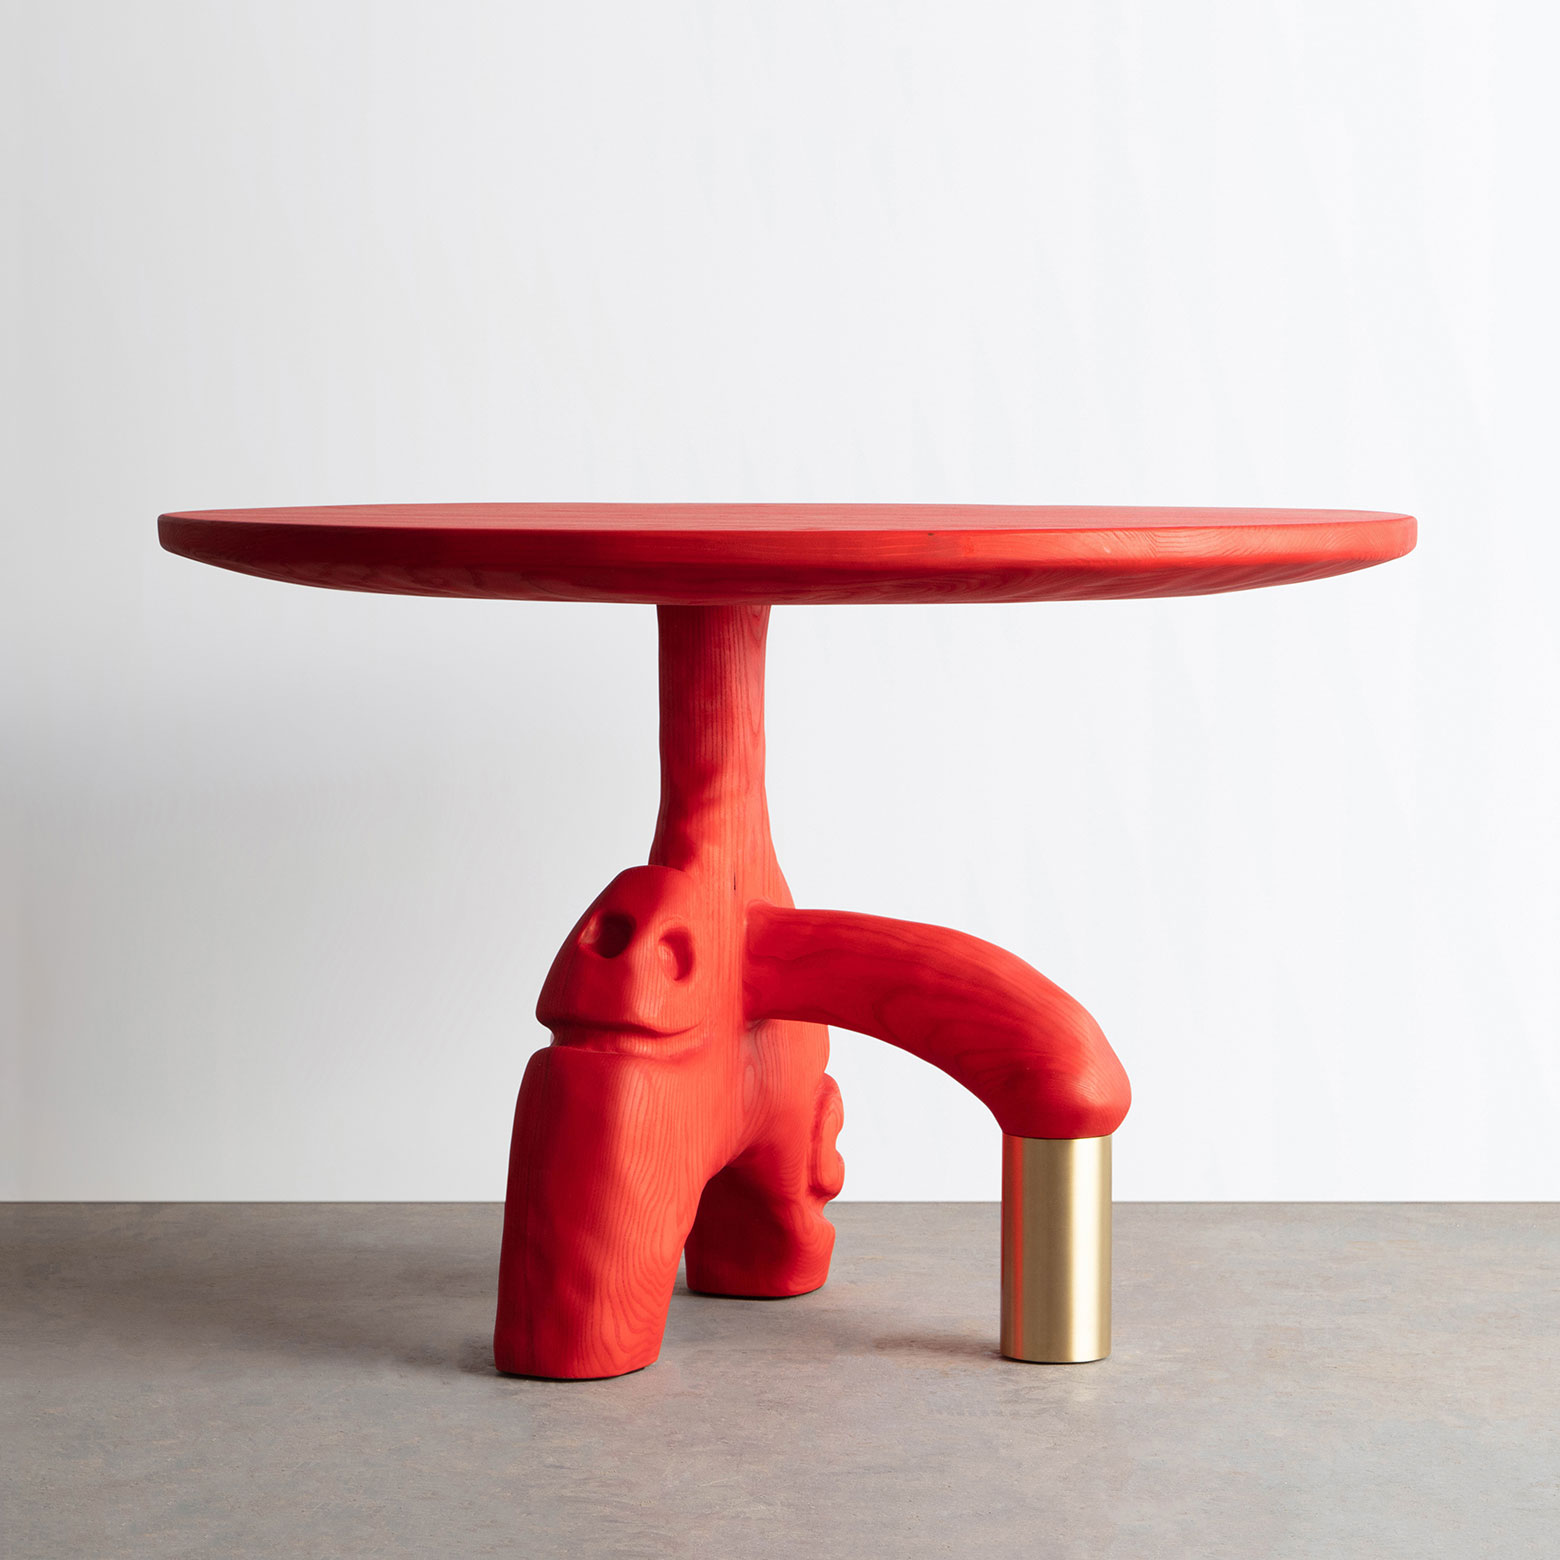 ‘001 Dining Table in Red’ by Casey McCafferty